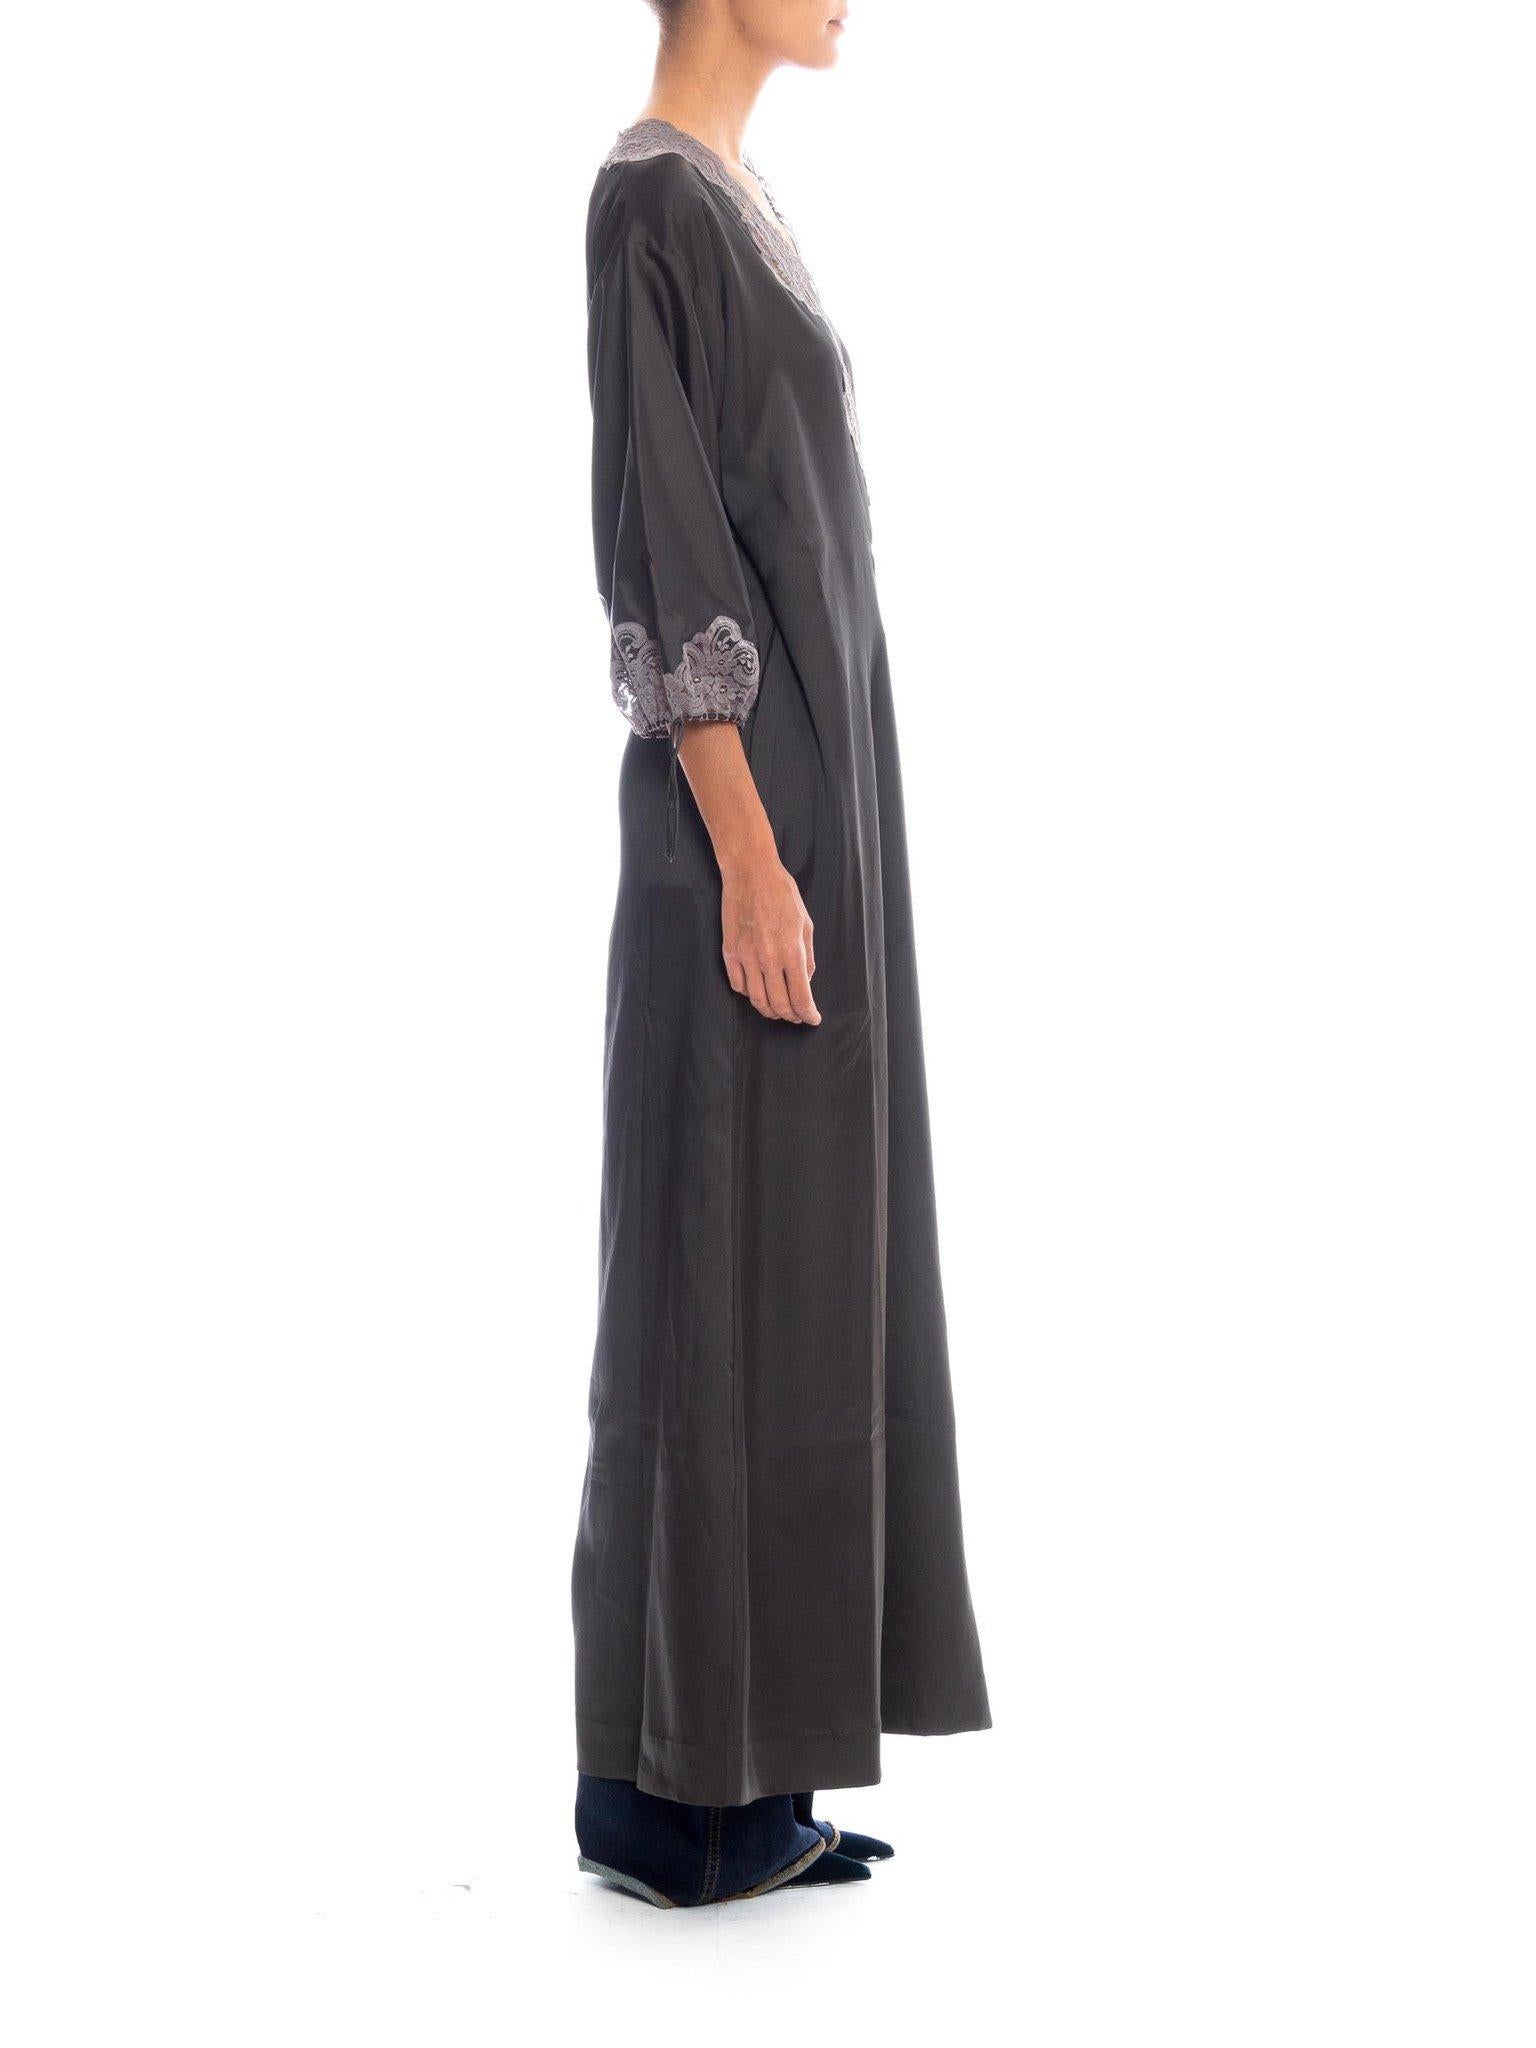 1970S SAKS FIFTH AVENUE Dark Grey Polyester Satin & Lace Negligee With Matching Wrap Robe